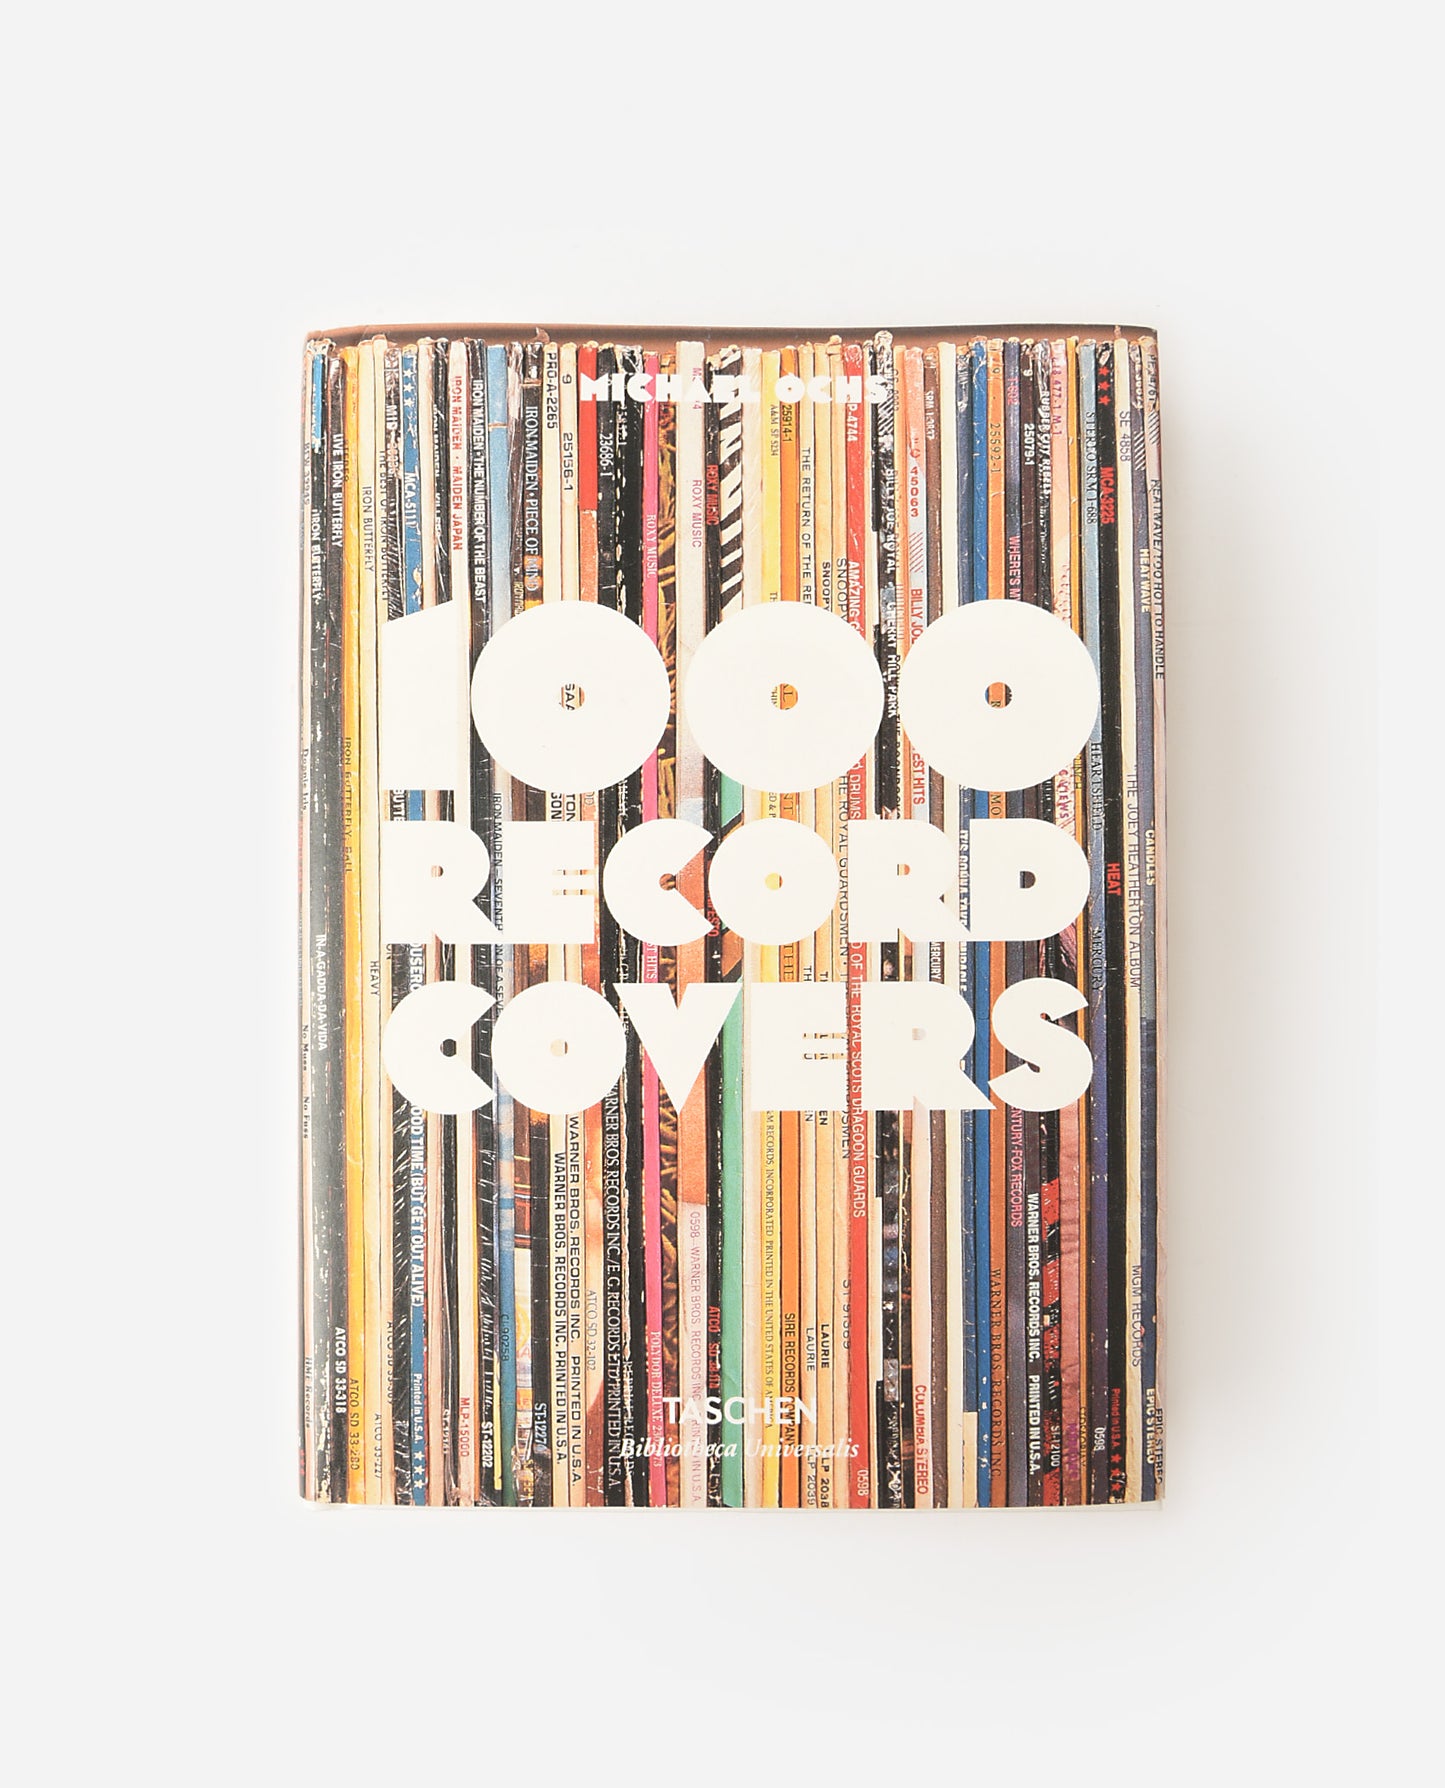 Taschen 1000 Record Covers